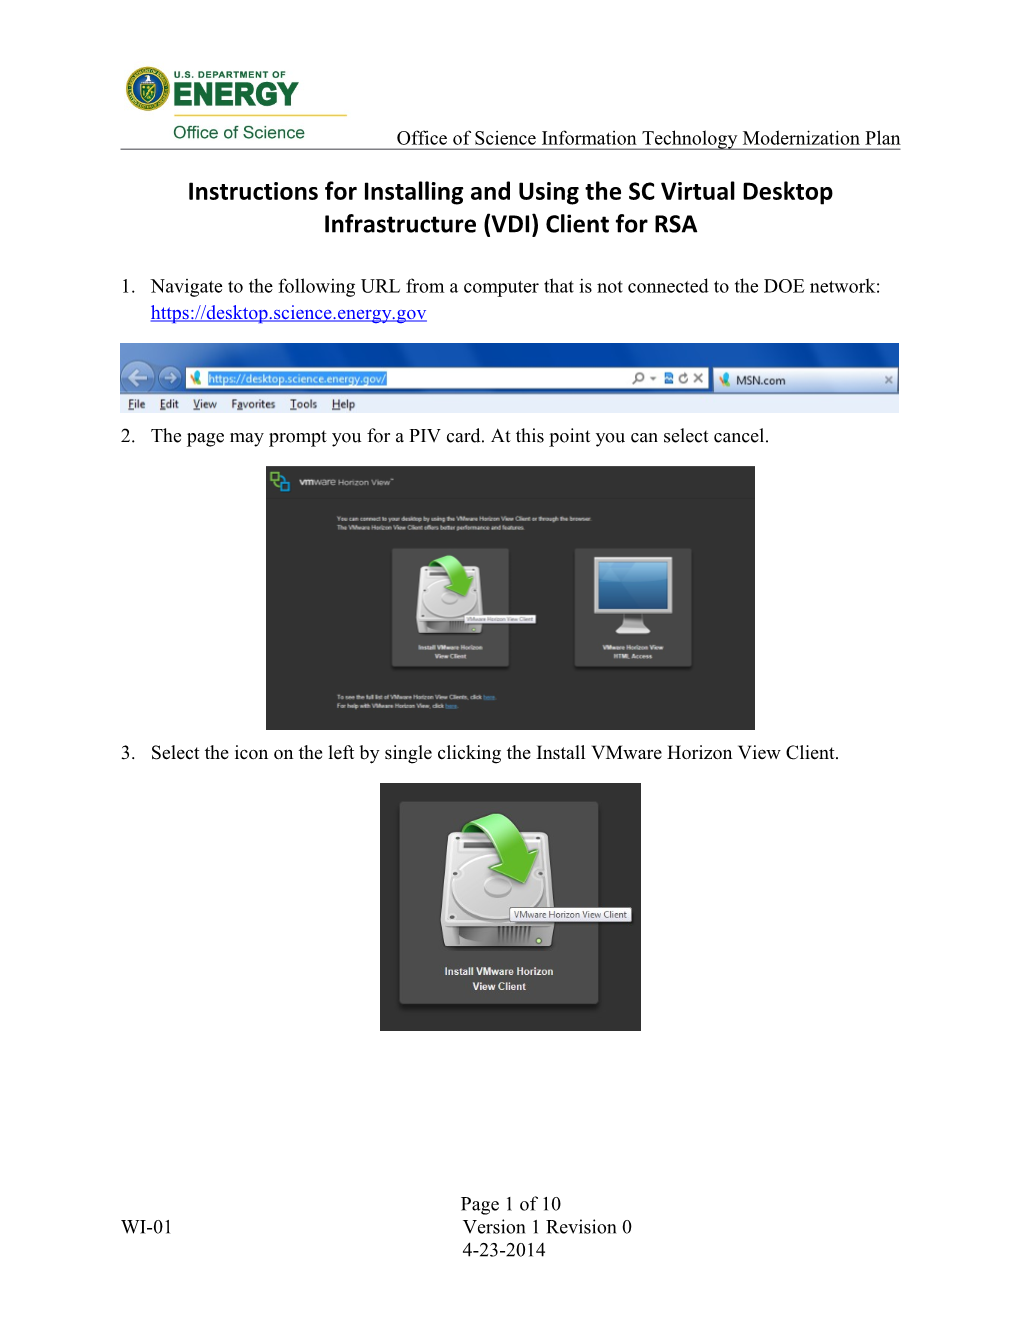 Instructions for Installing and Using the SC Virtual Desktop Infrastructure (VDI) Client